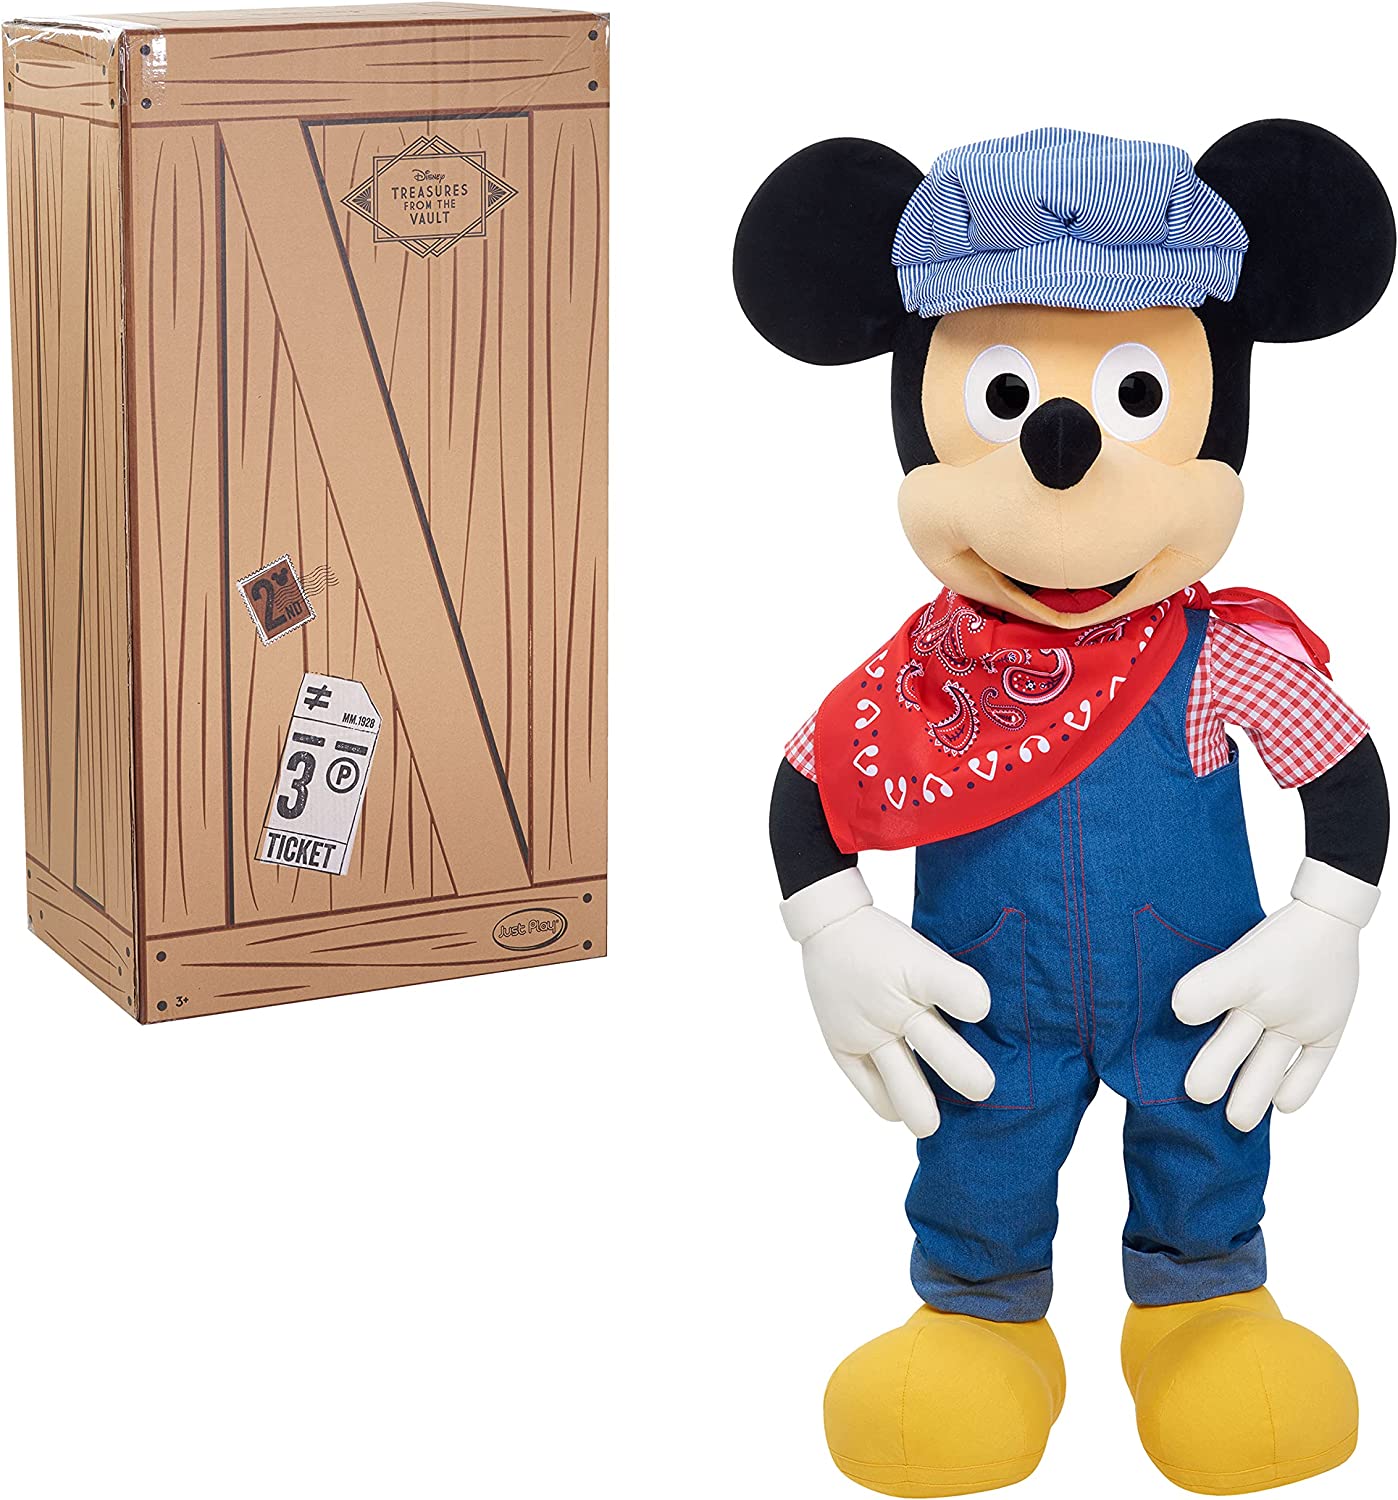 36" Treasures of The Disney Vault Engineer Mickey Plush $13 + Free Shipping w/ Prime or on $25+